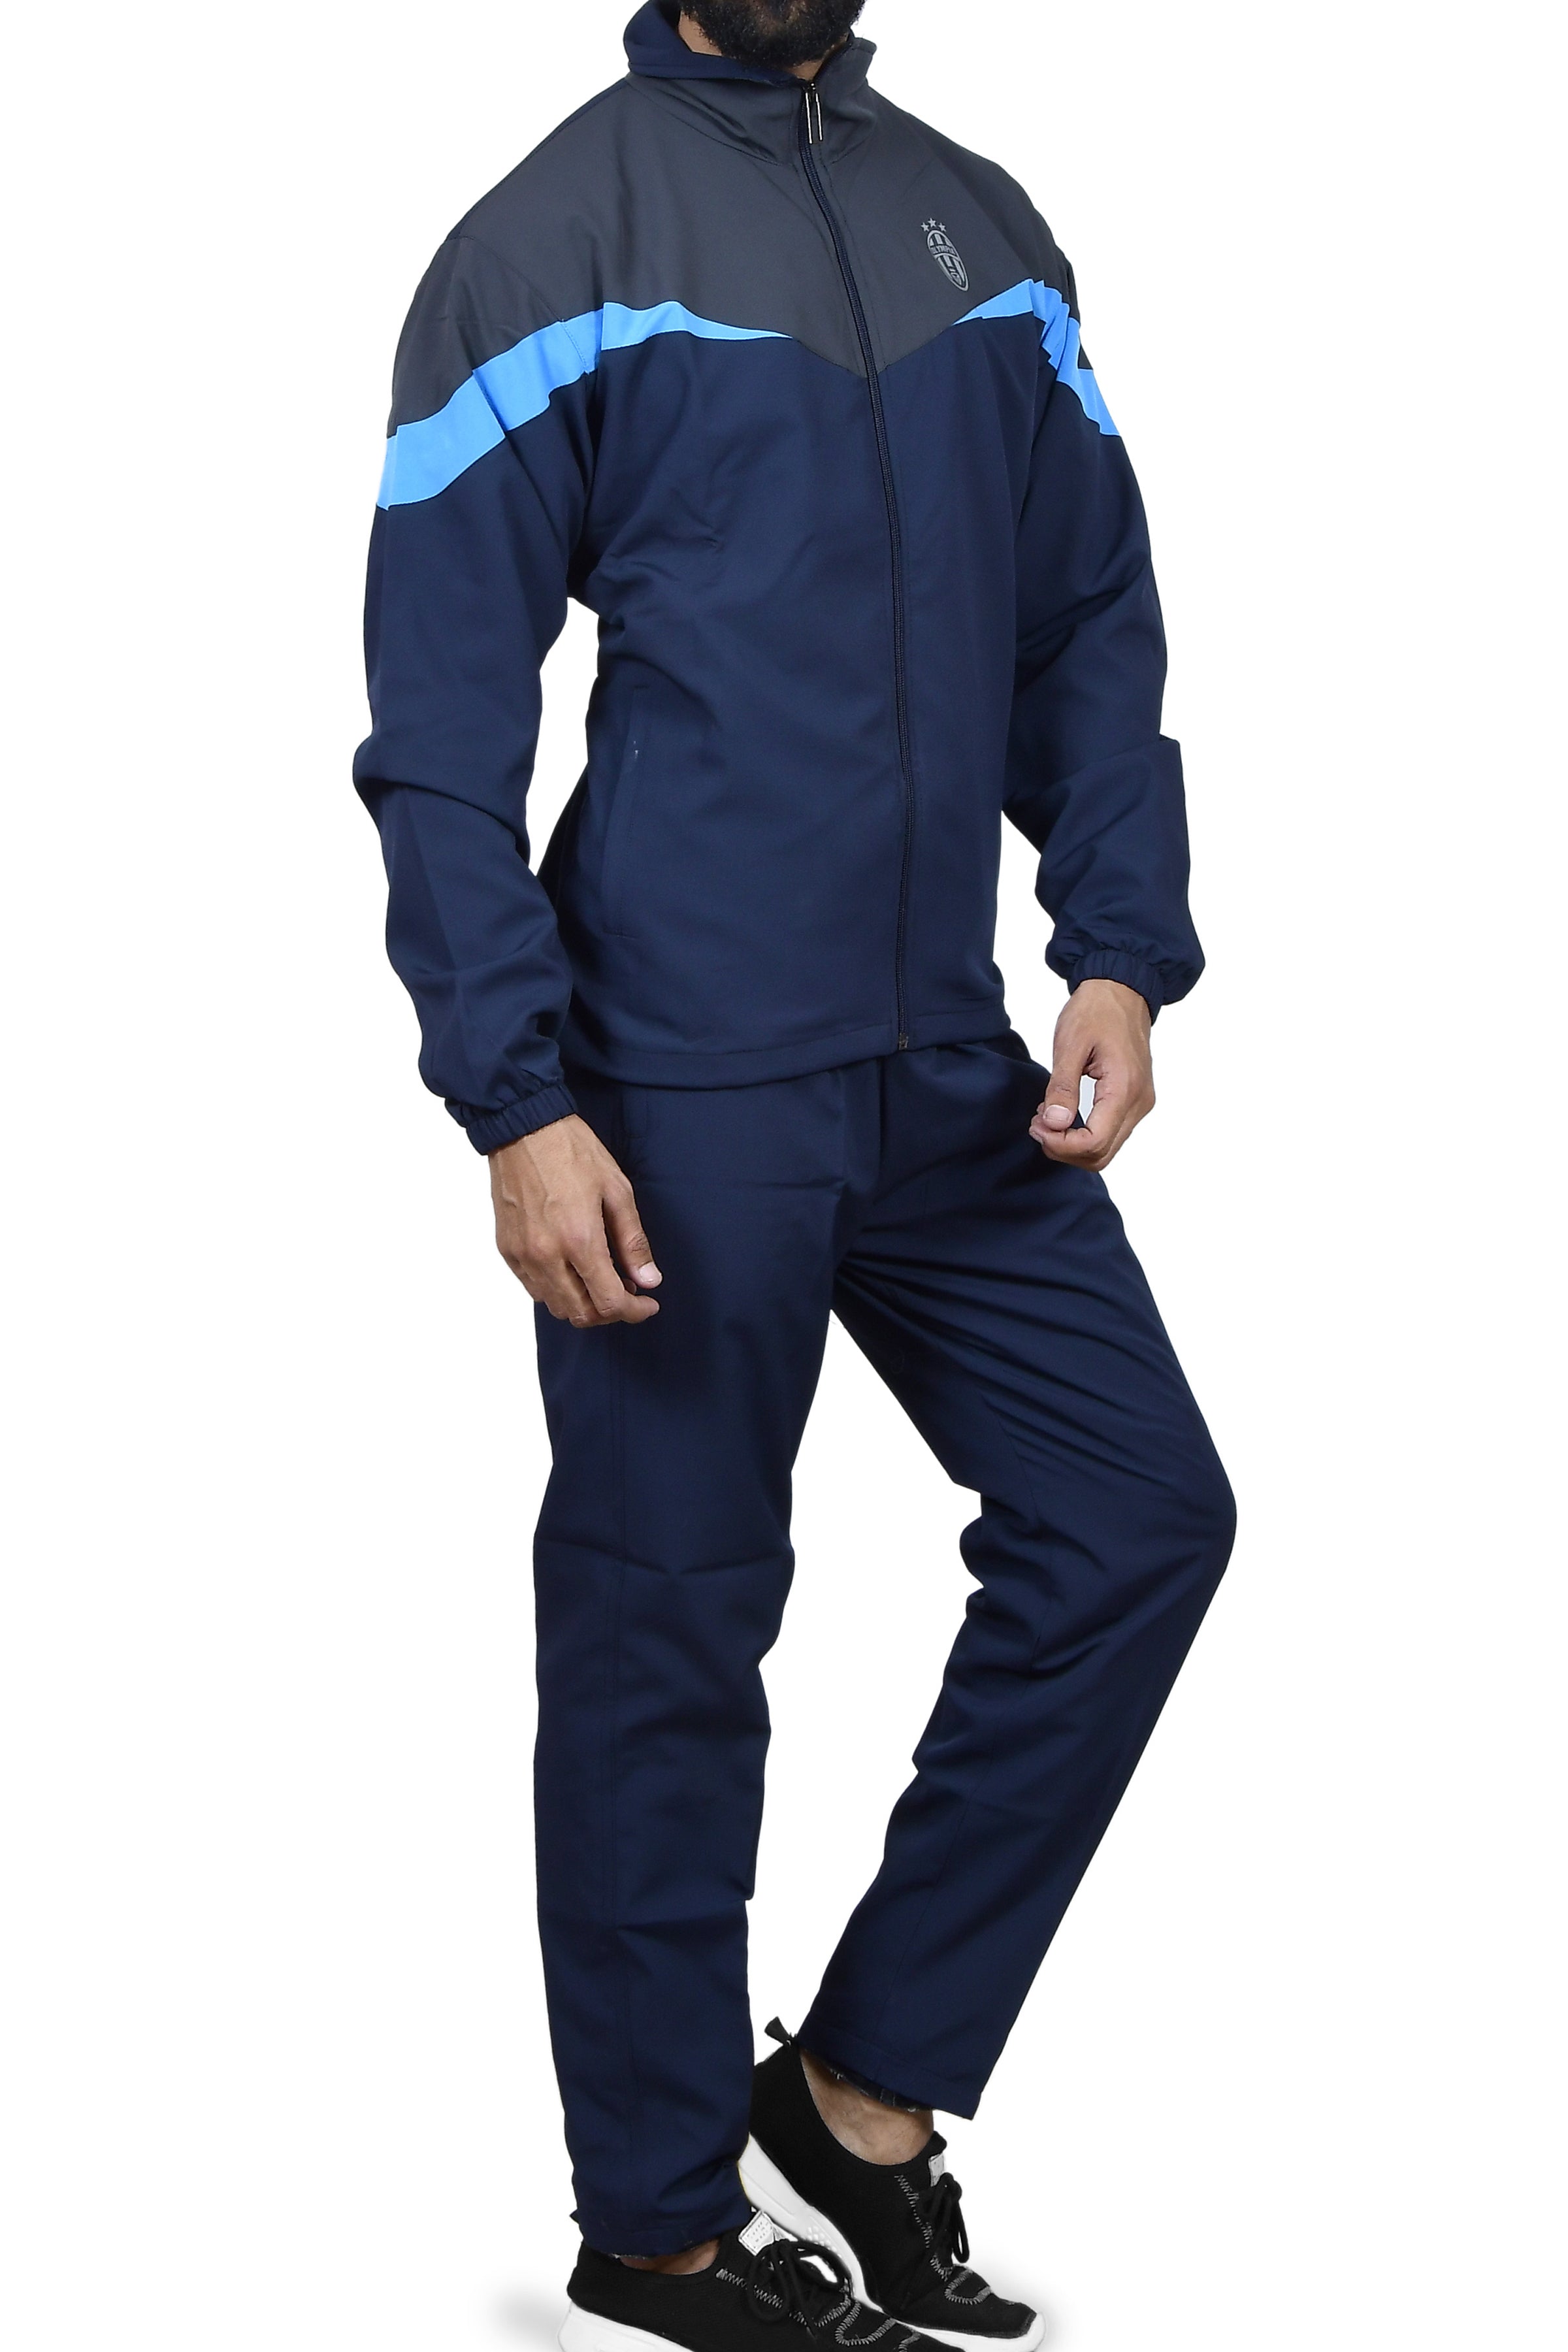 Men's Dry Fit Sports Full Sleeves Zipper Tracksuit for Men - TS-02 - Fitness Outdoor Athletic Gym Running Men's Tracksuit